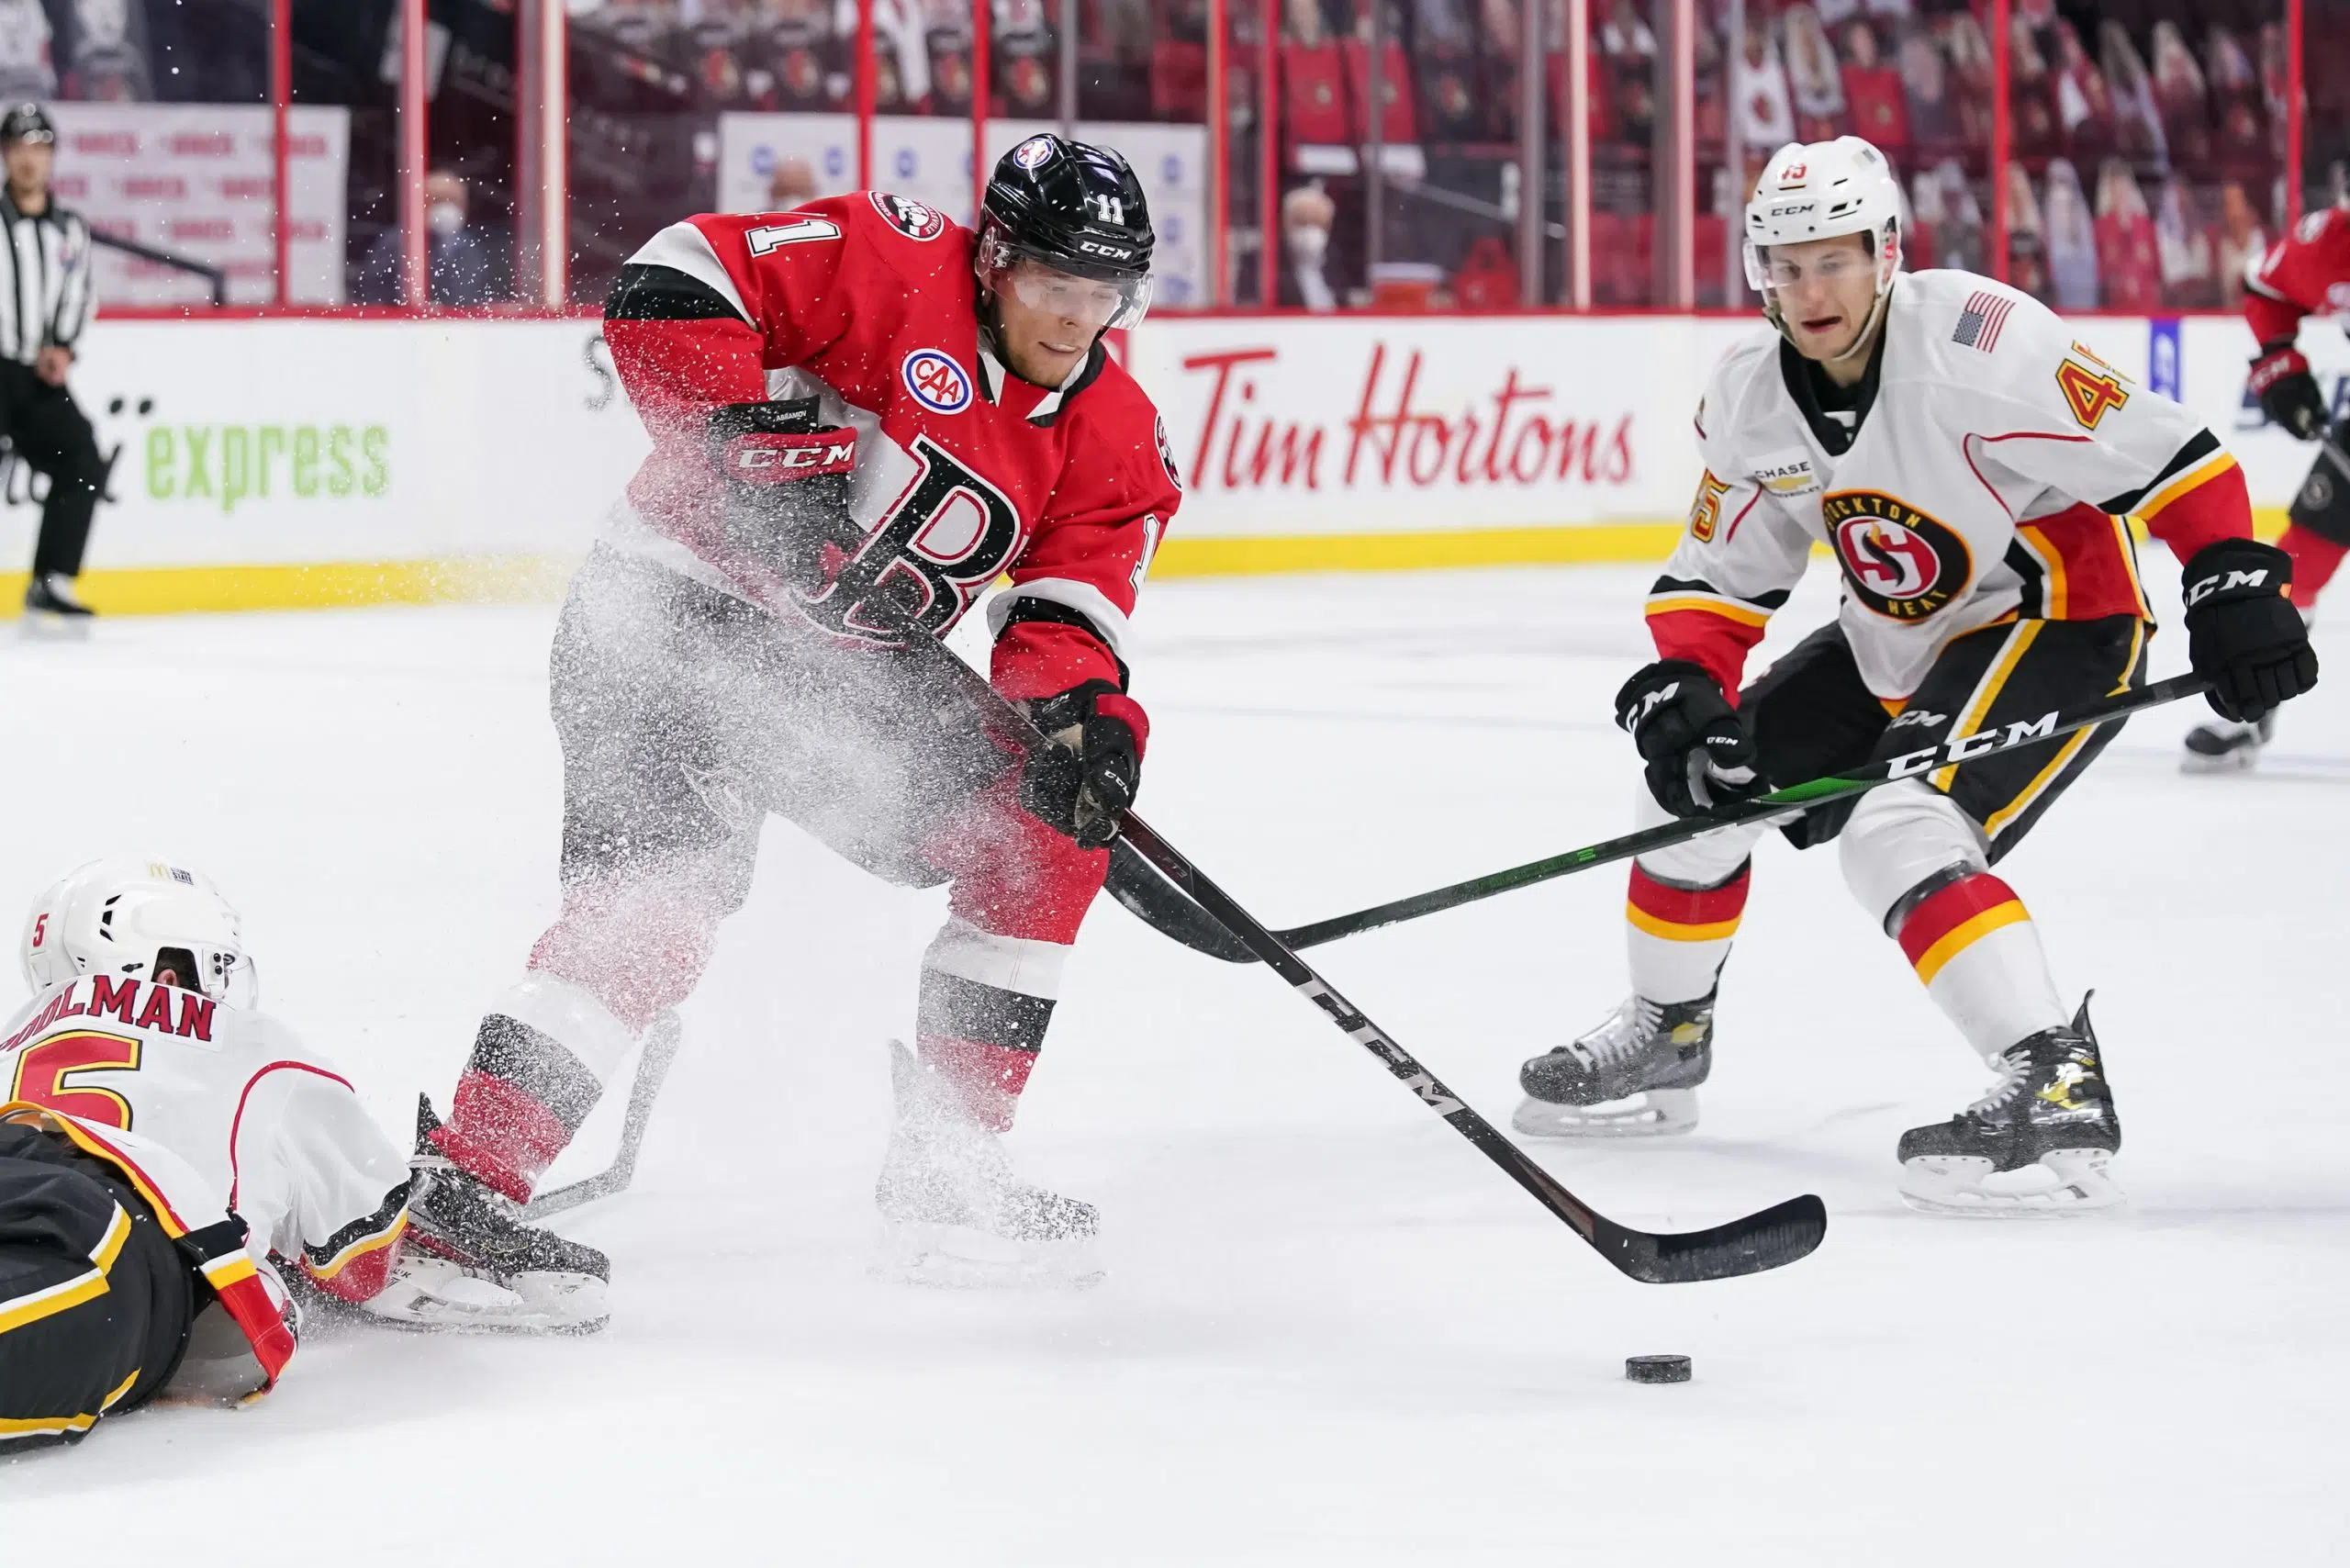 Frustrating loss for B-Sens in rematch with Heat